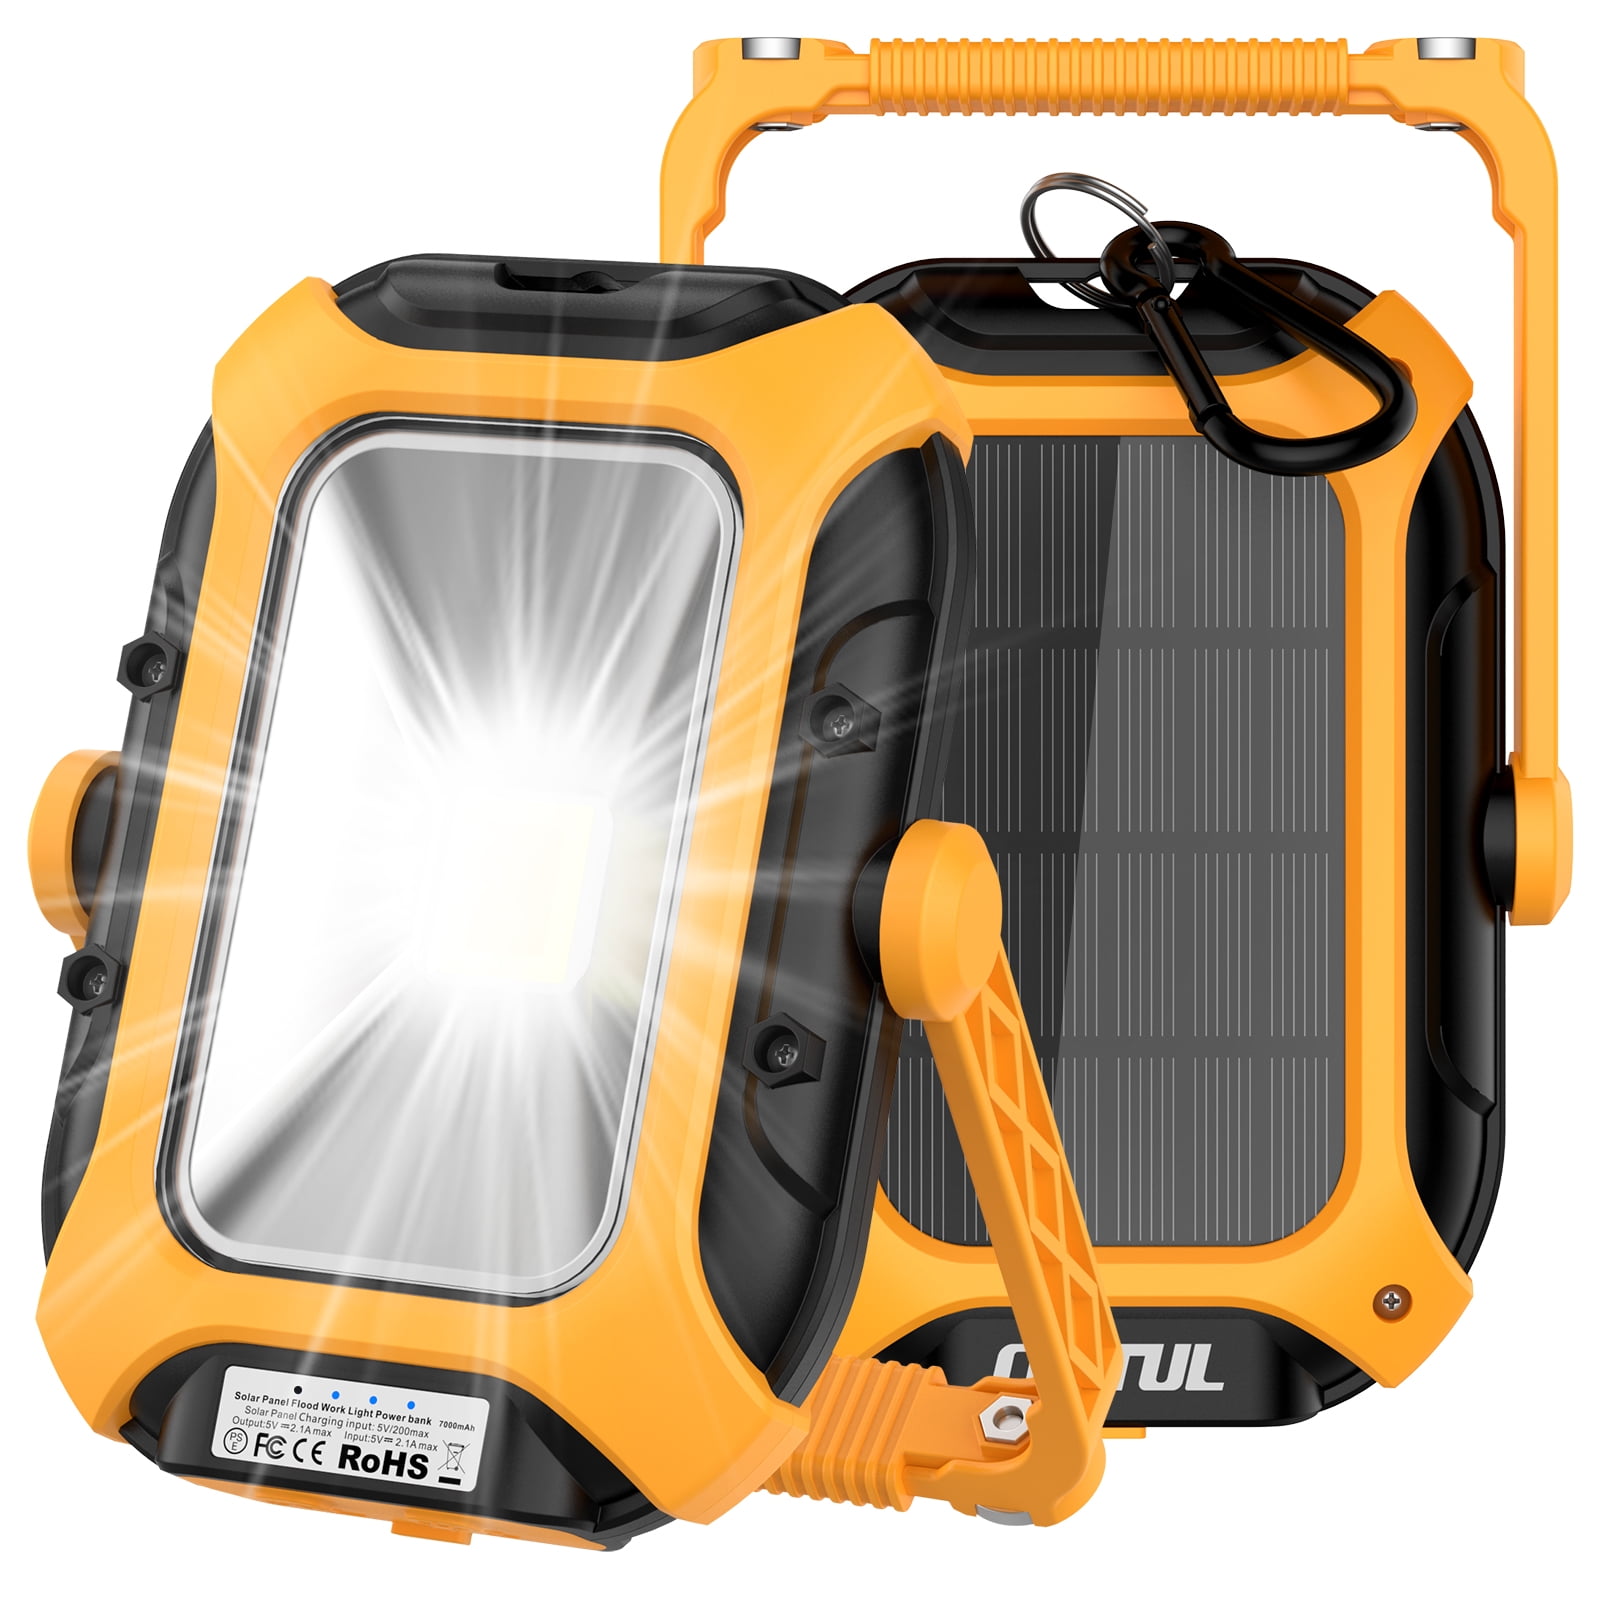 Battery Included 2PCS Rechargeable Work Light COB 20W 1000LM Waterproof LED Portable Flood Light for Outdoor Camping Hiking Emergency Car Repairing Fishing BBQ